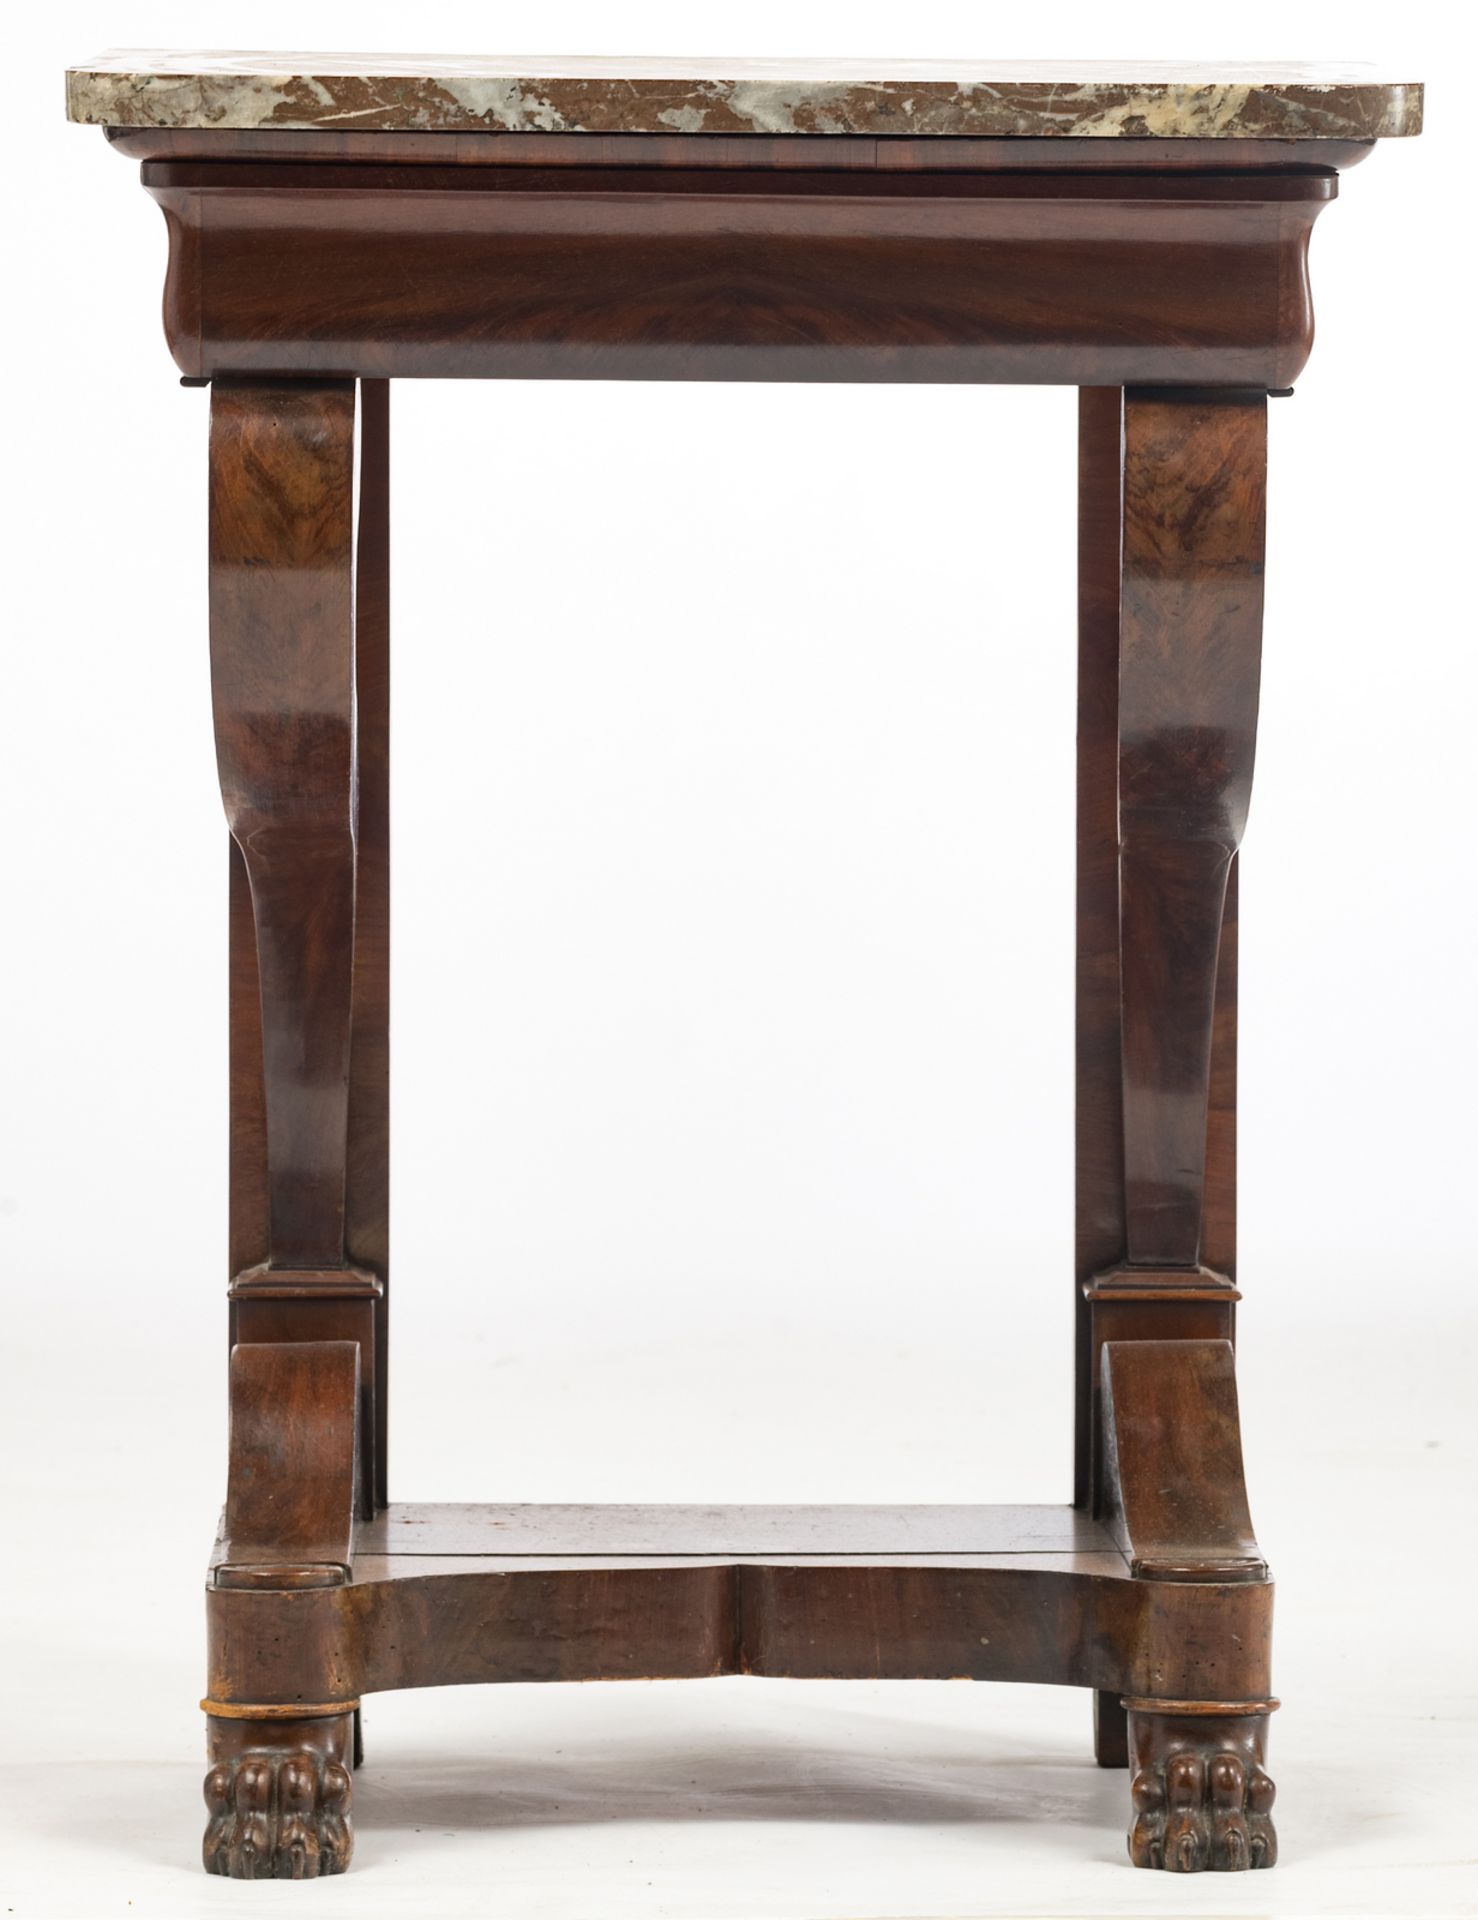 Louis Philippe mahogany console table with paw feet and marble top, H 79 - W 57,5 - D 42,5 cm - Image 2 of 10